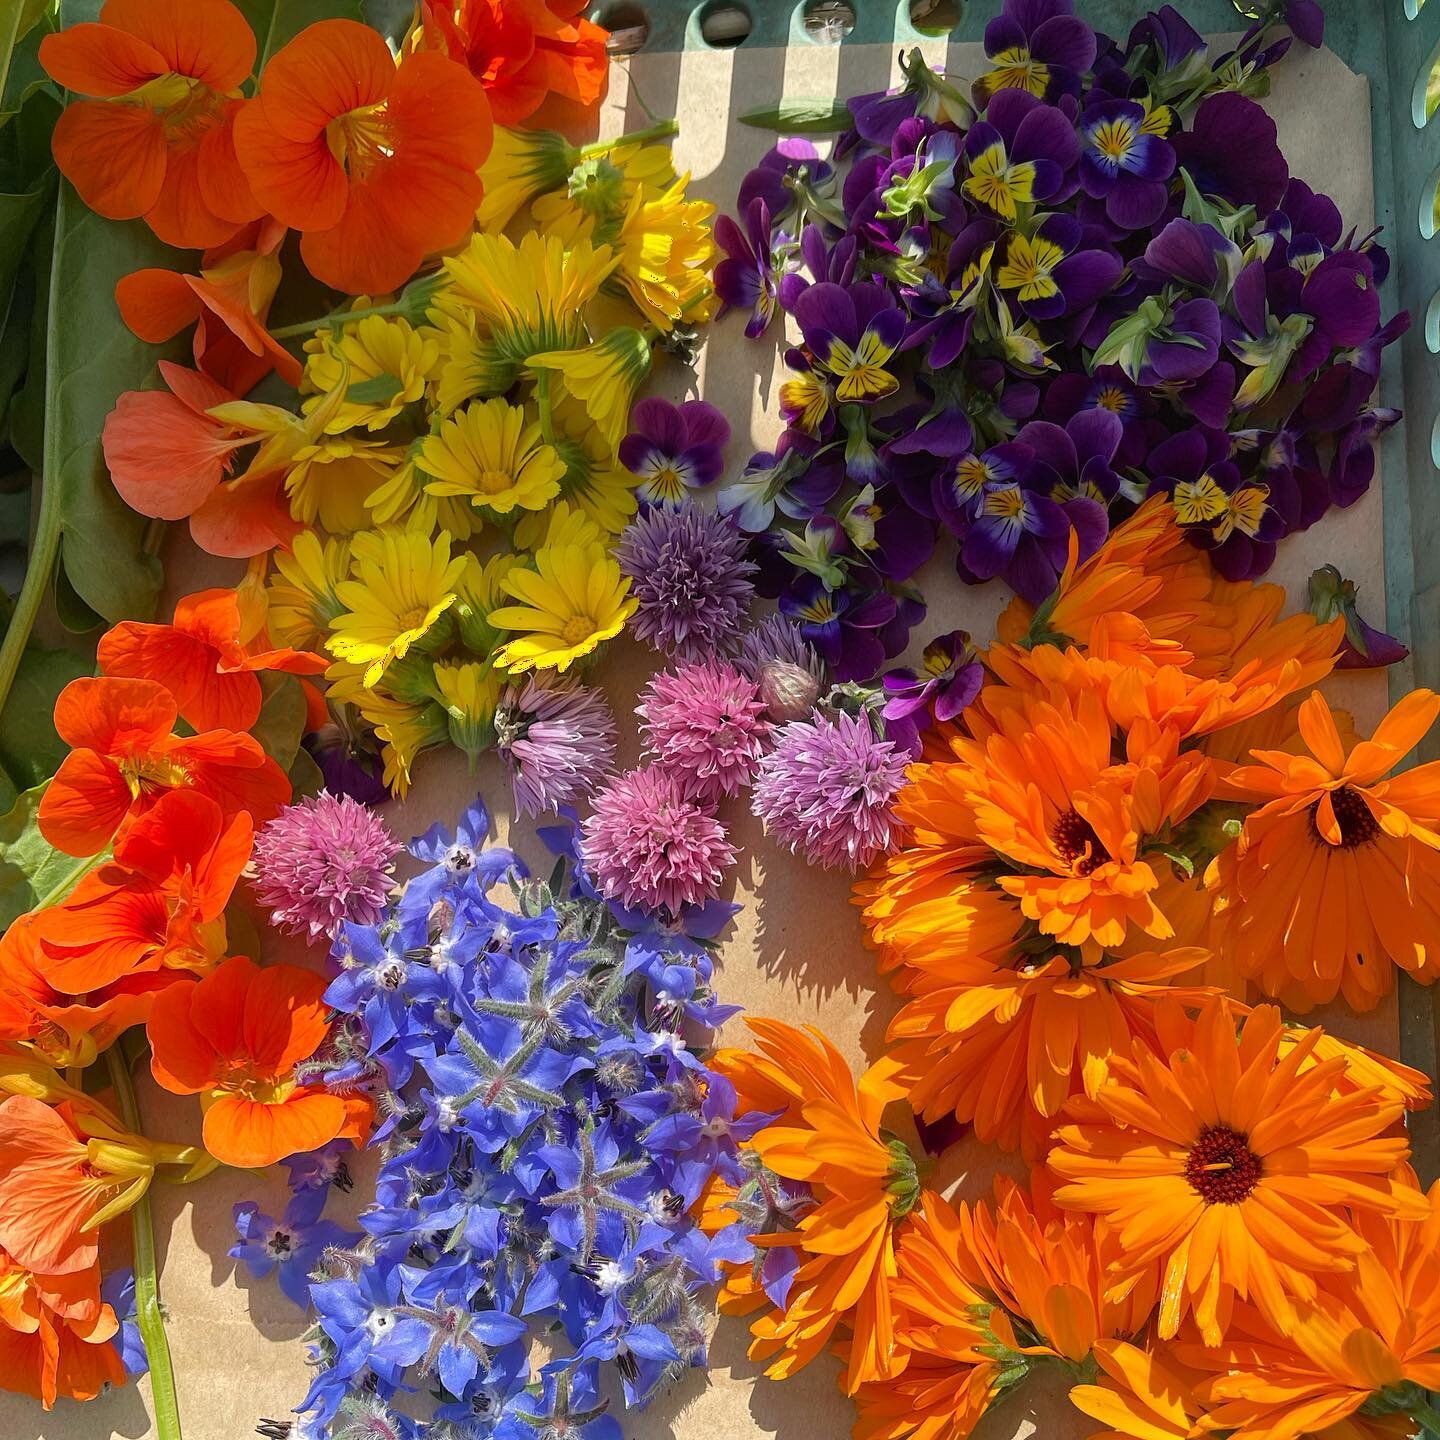 Edible Flowers for Moonacre Salads, freshly picked early this morning. 💐

We have exciting salad plans coming together for this year. We always put edible flowers in our salads because they lift the spirits, they add colour and a delicate, fragrant 